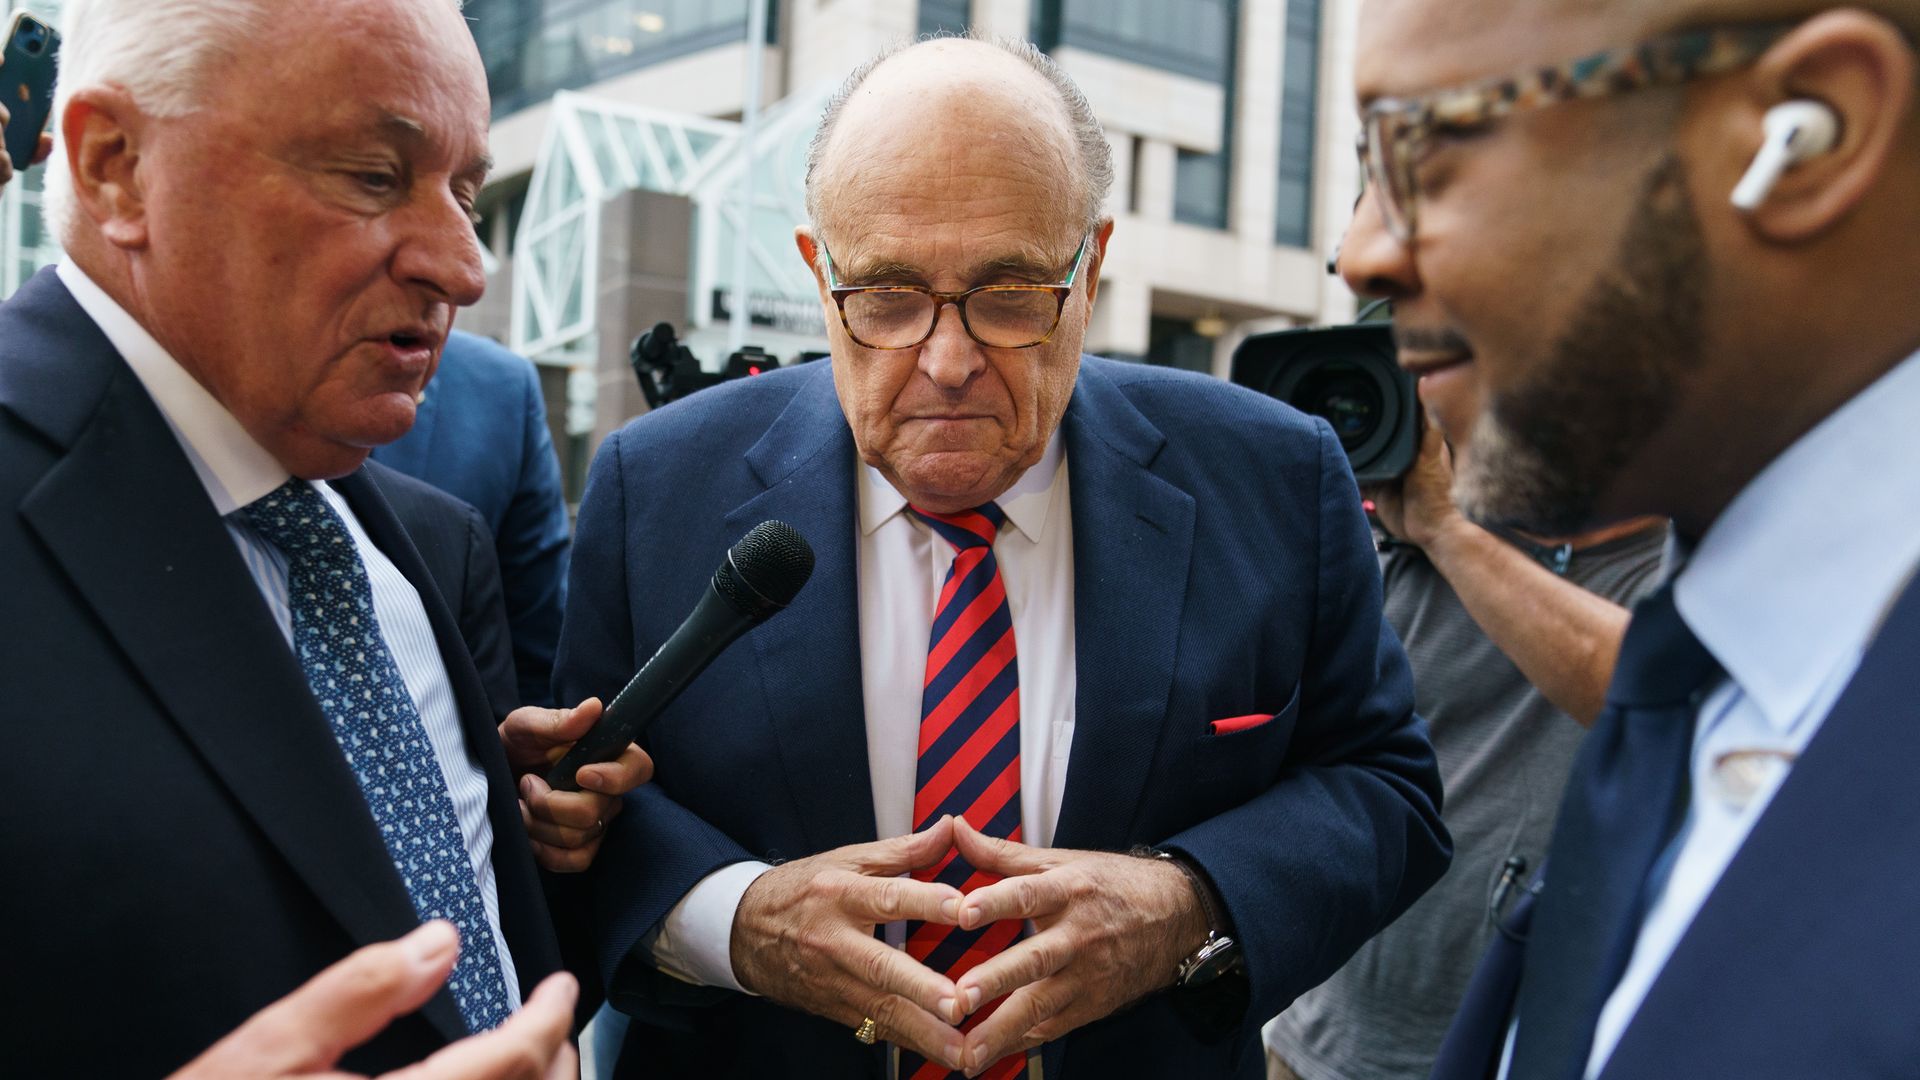 Rudy Giuliani, former lawyer to Donald Trump, arrives at Fulton County Superior Court in Atlanta, Georgia, US, on Wednesday, Aug. 17, 2022.